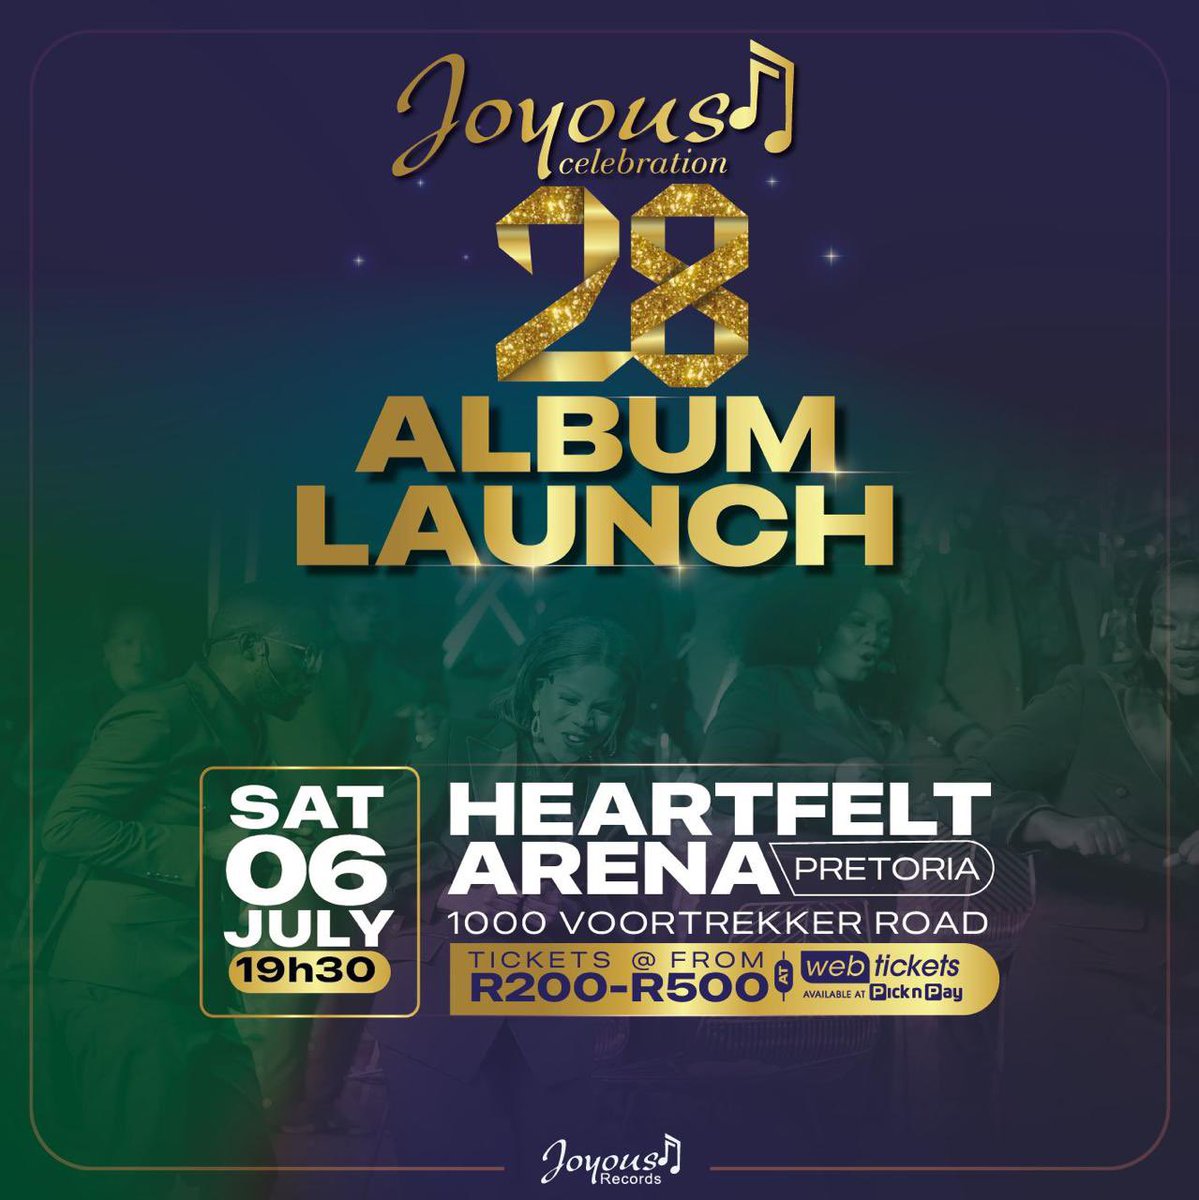 And TICKETS to #JoyousCelebration28 Album Launch are officially LIVE,

💚💜💙 Our tickets are only SOLD at Webtickets or PickNPay ‼️

🎫webtickets.co.za/v2/Event.aspx?…

🚨PLEASE AVOID BUYING TICKETS THROUGH THIRDPARTY WEBSITES🚨